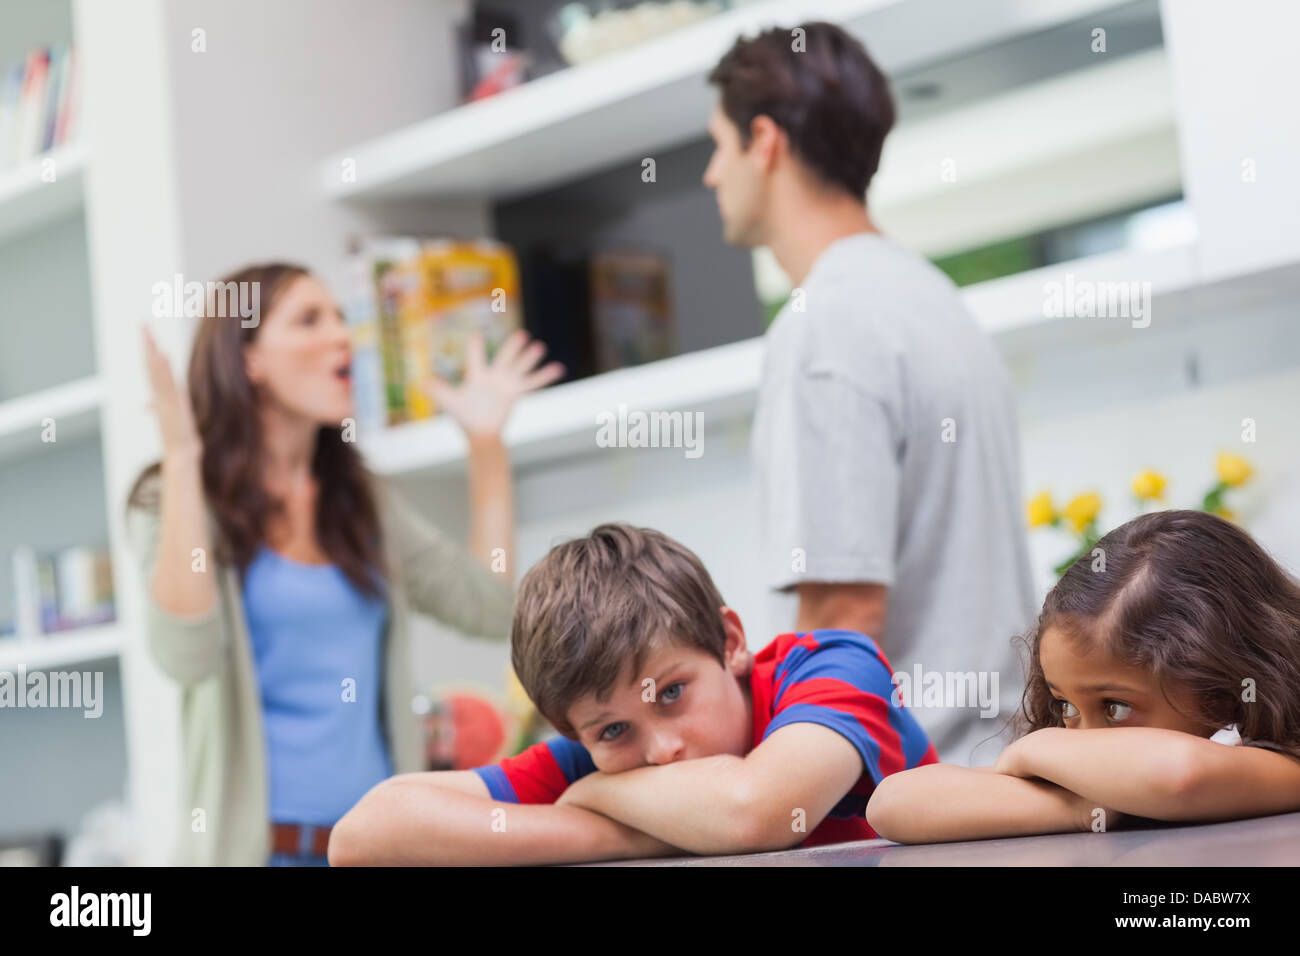 Couple arguing behind their children Stock Photo